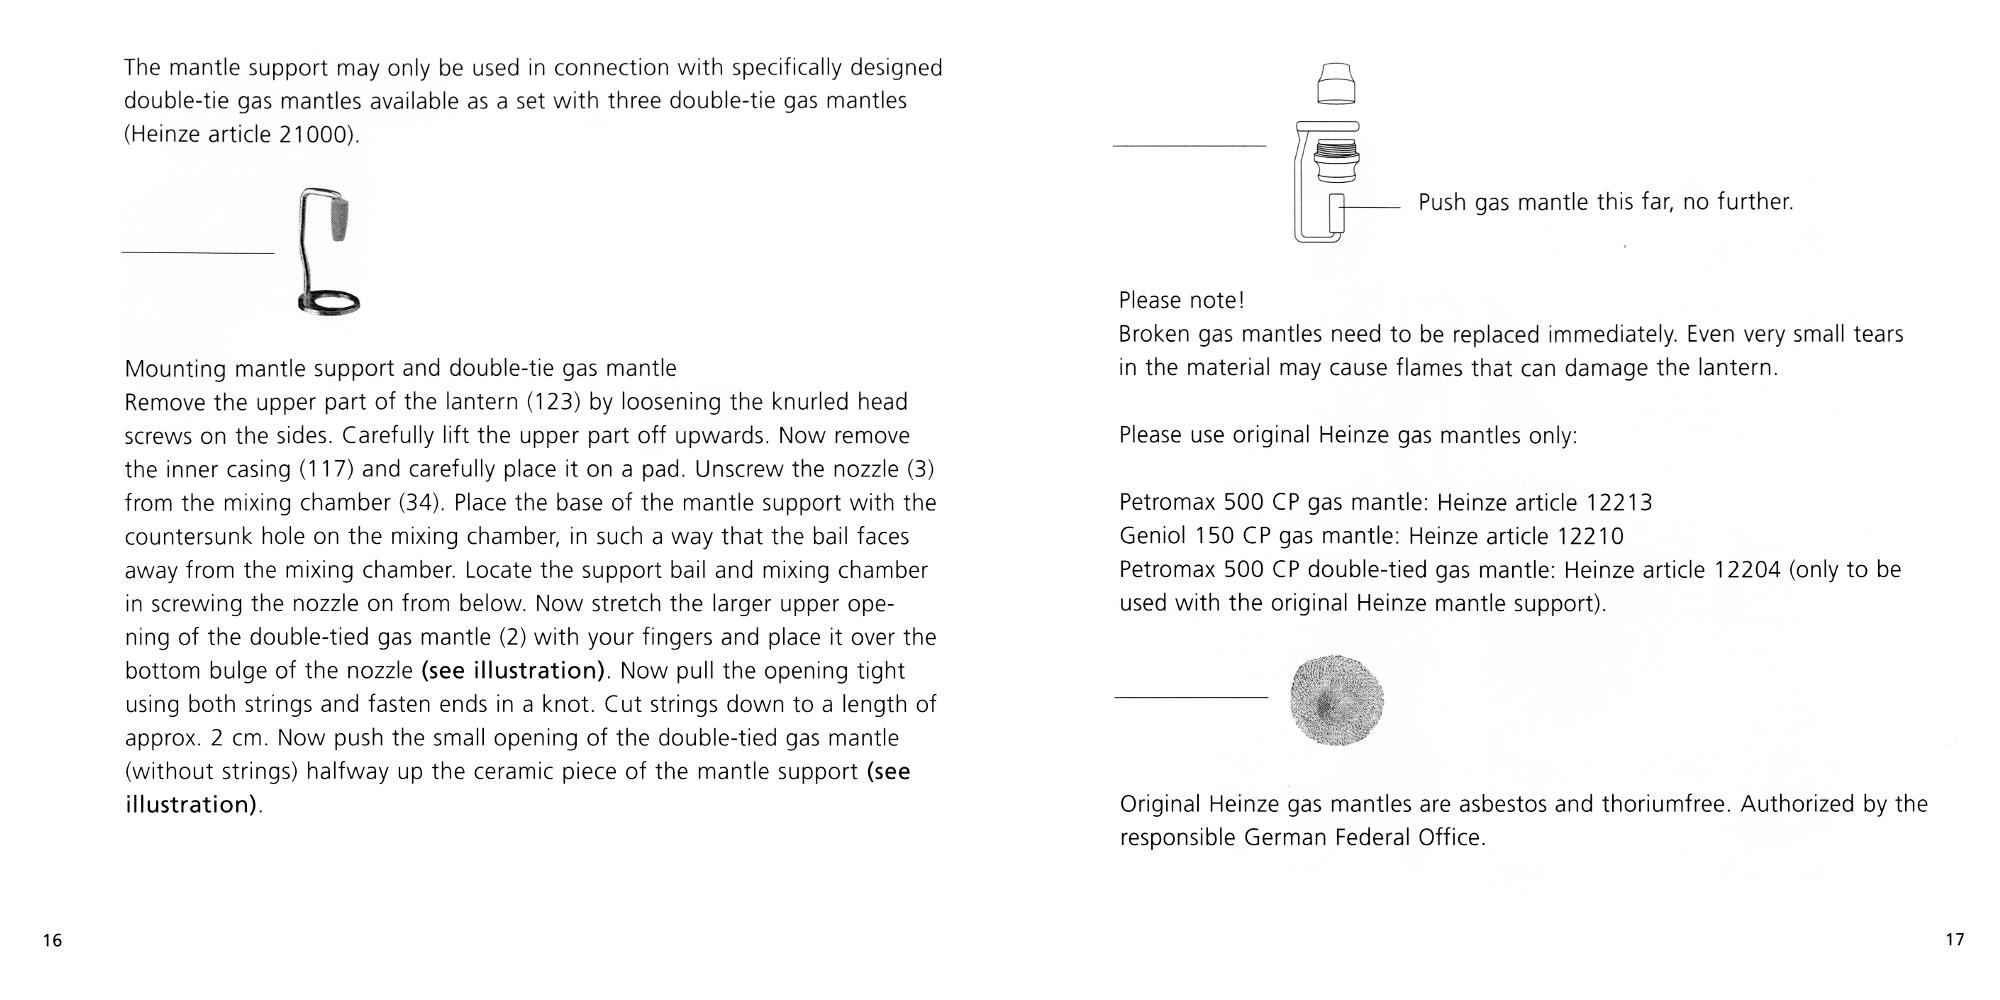 Petromax Instructions page 16 and 17